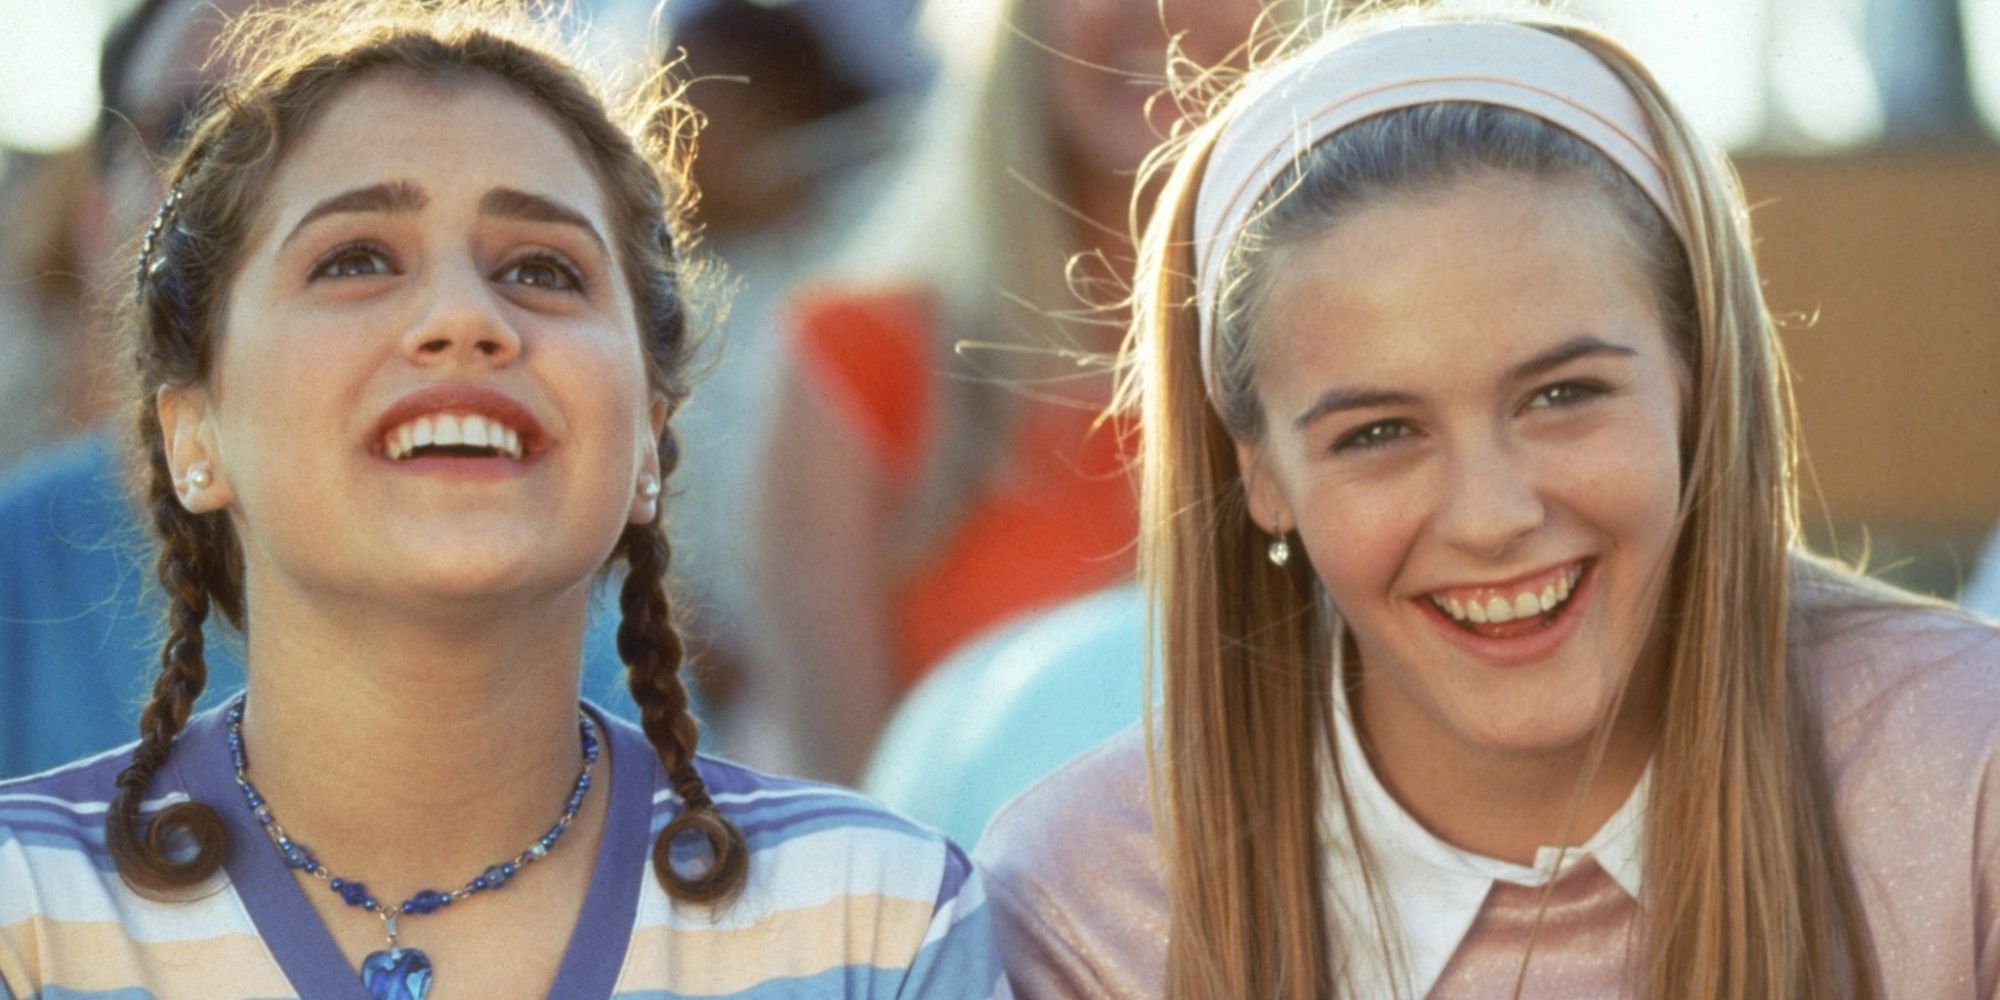 Brittany Murphy and Alicia Silverstone in Clueless